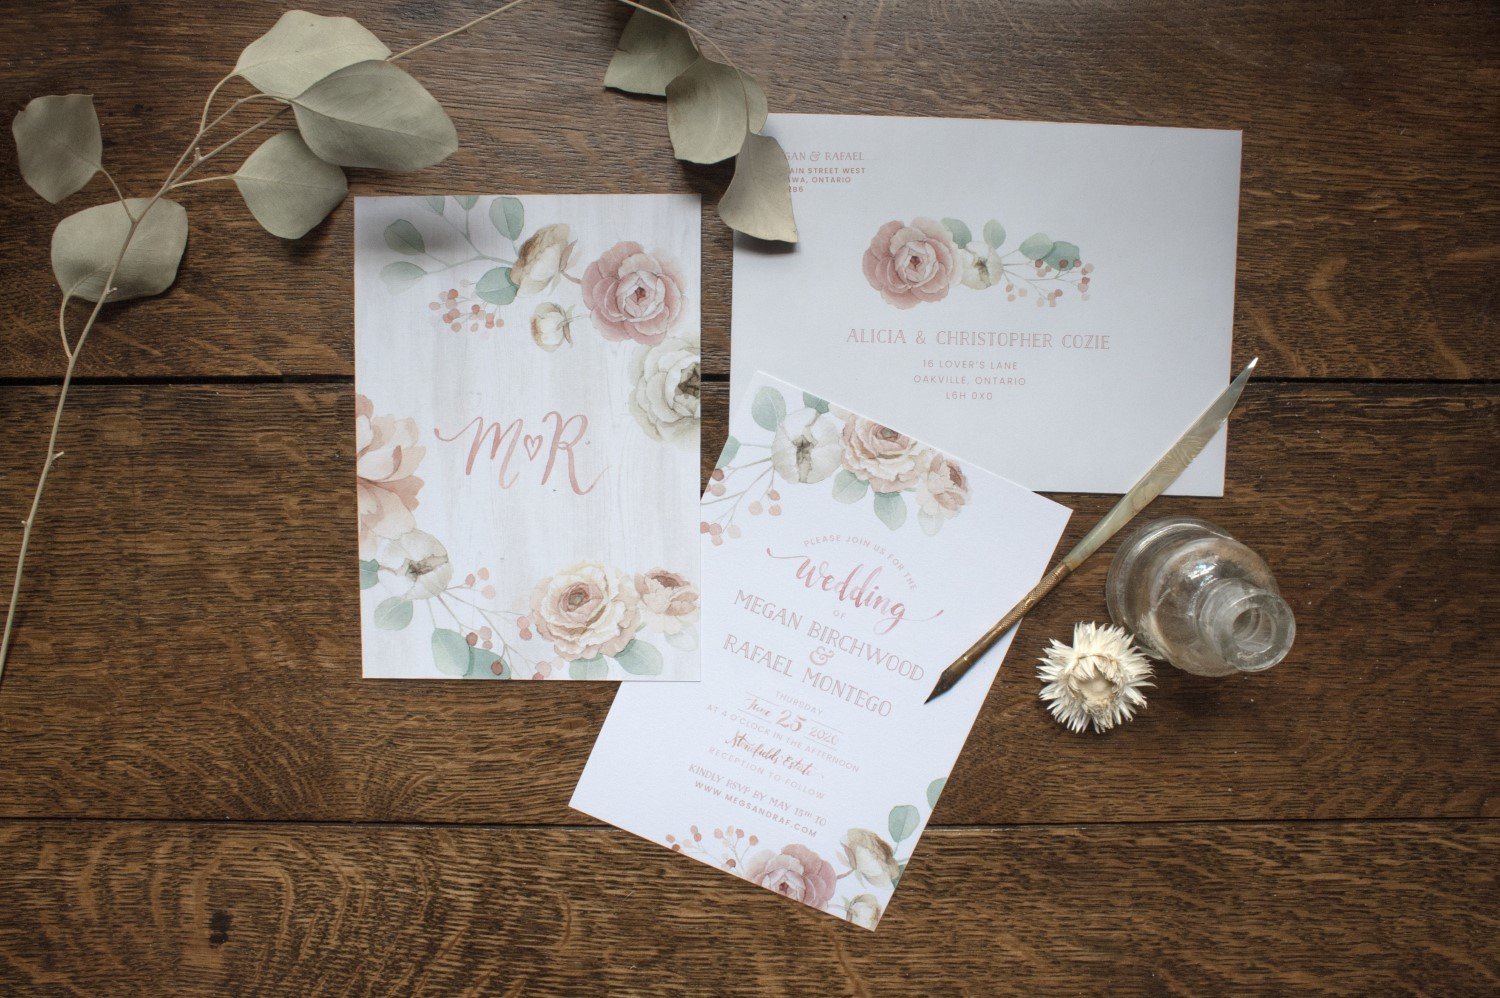 Rustic Whitewashed Barnboard with Florals